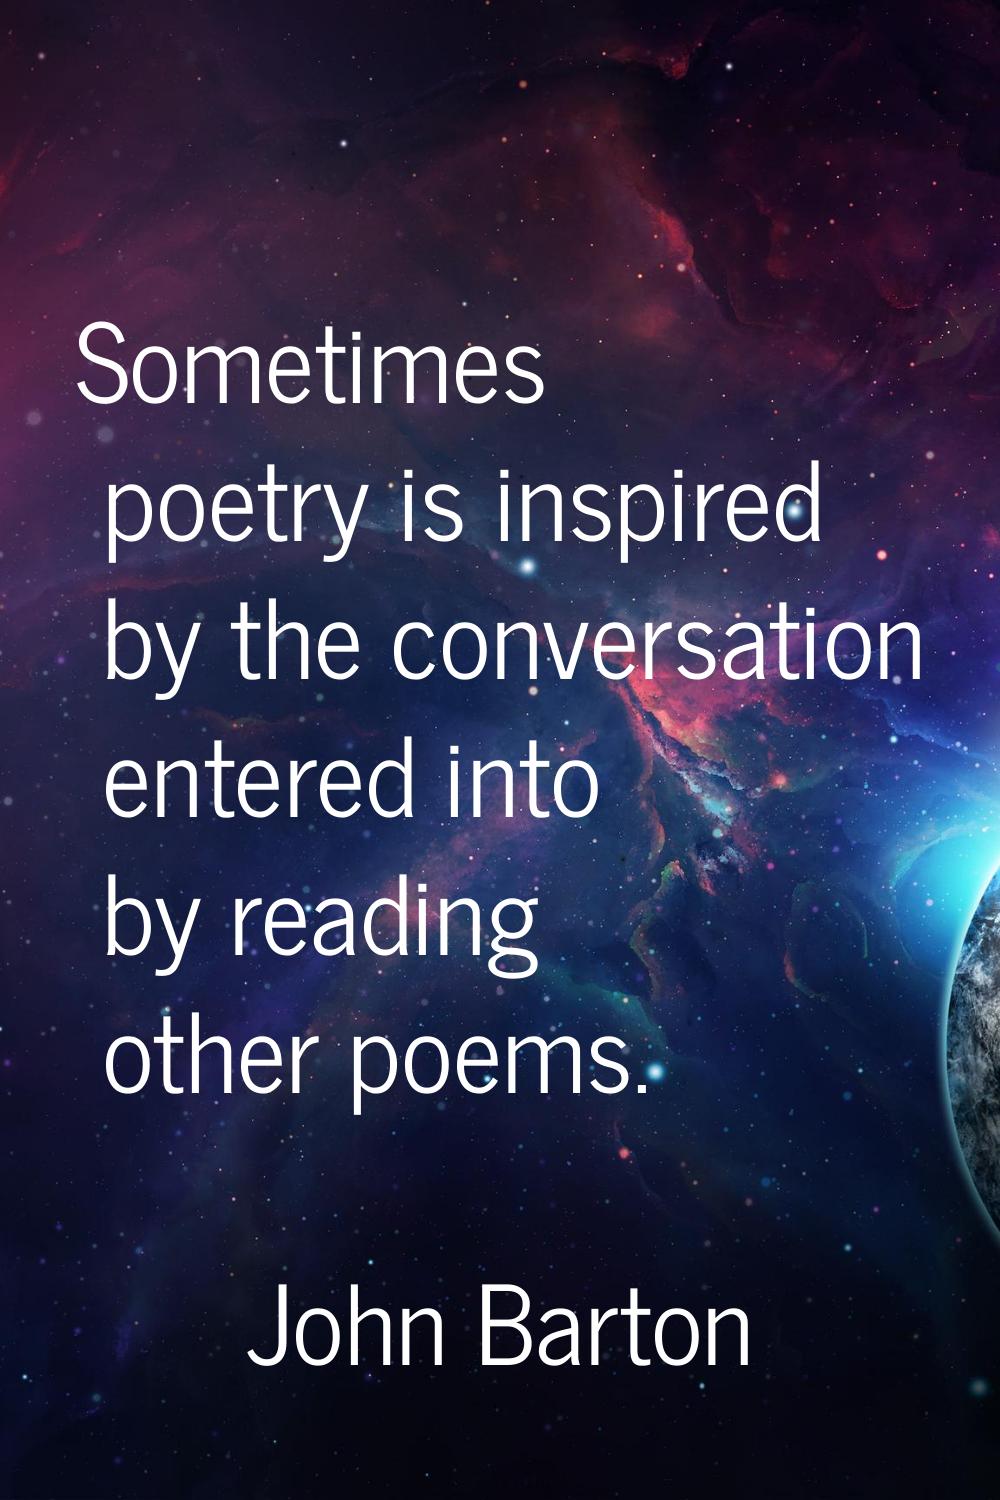 Sometimes poetry is inspired by the conversation entered into by reading other poems.